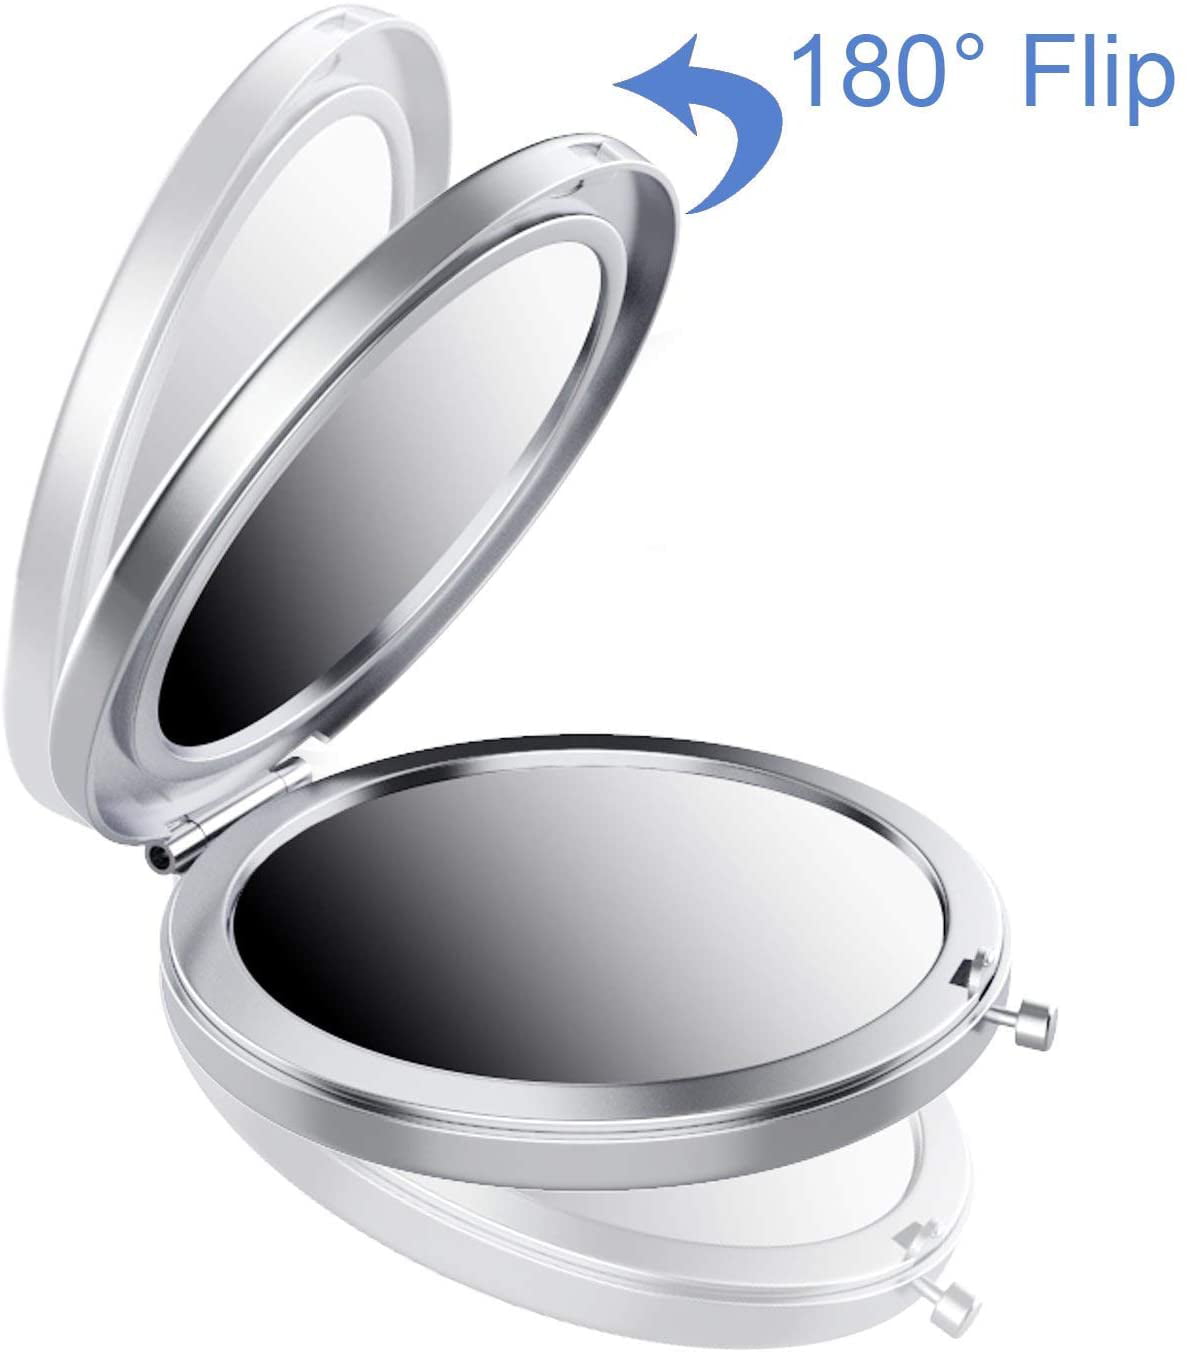 3 Pieces Magnifying Compact Cosmetic Mirror 2.75 Inch Round Pocket Makeup  Mirror Travel Handheld Com…See more 3 Pieces Magnifying Compact Cosmetic